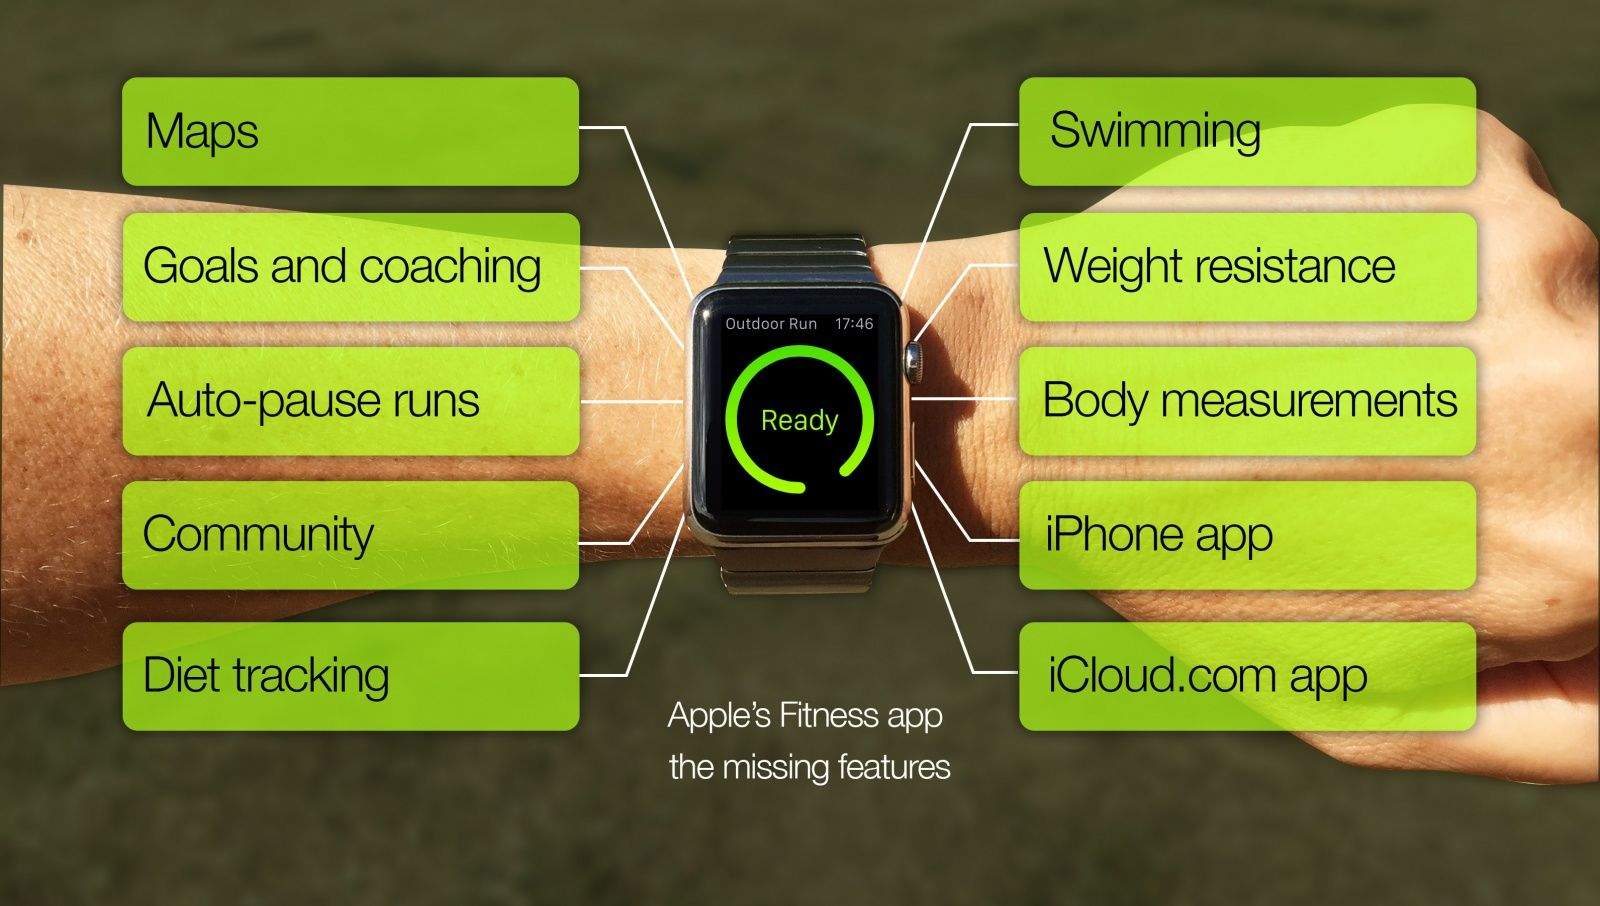 How could Apple improve their fitness offering?